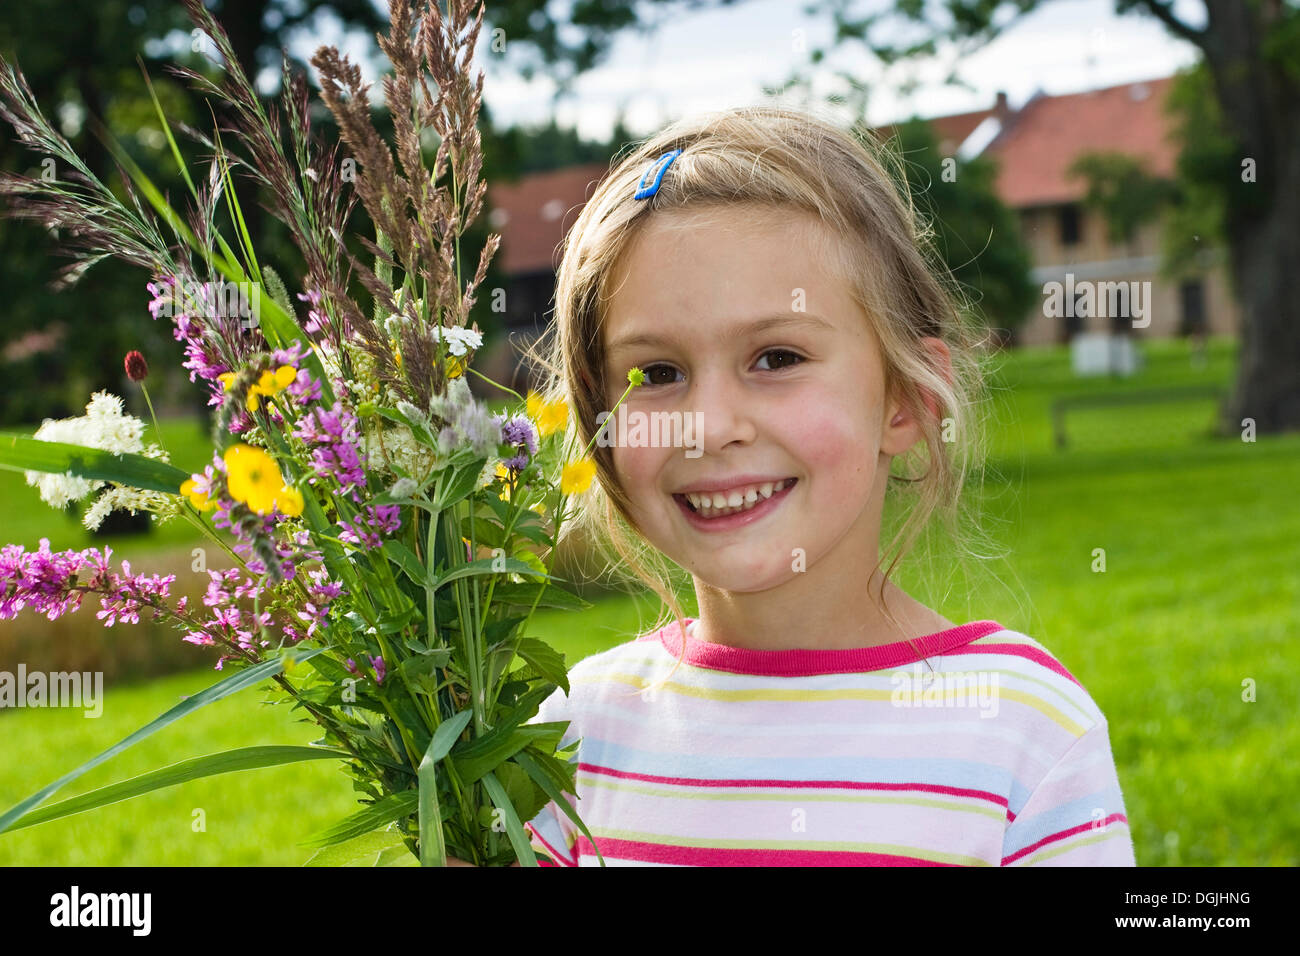 Little Blonde Girl Holding A Bunch Of Wildflowers